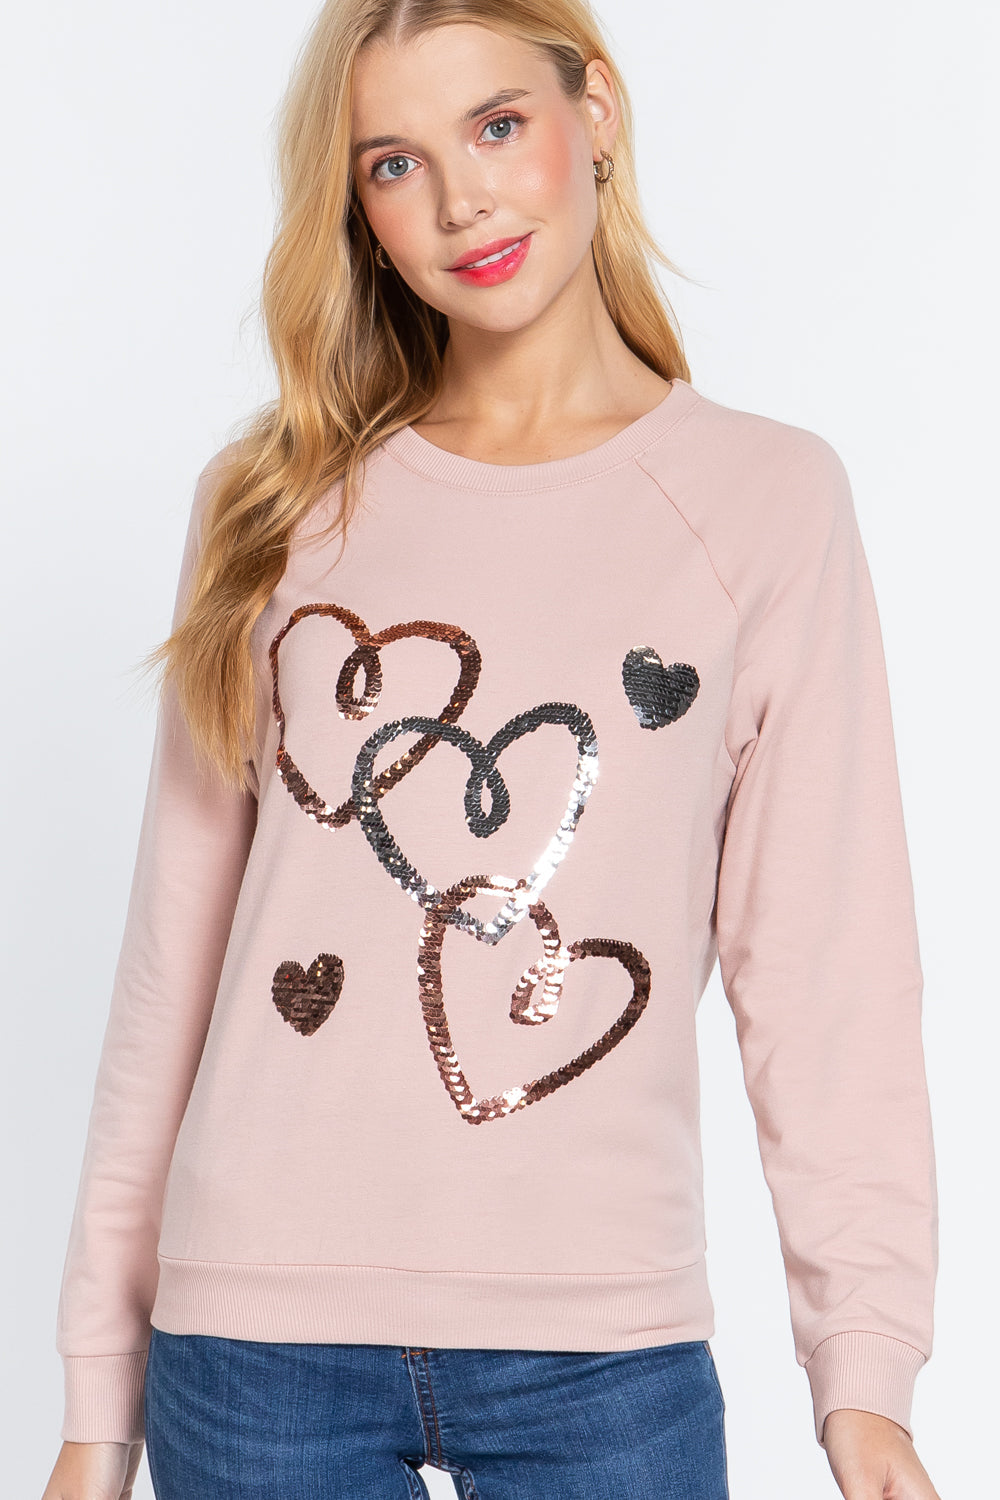 Pale Pink Sequins French Terry Crewneck Sweatshirt Pullover Top Shirts & Tops jehouze 